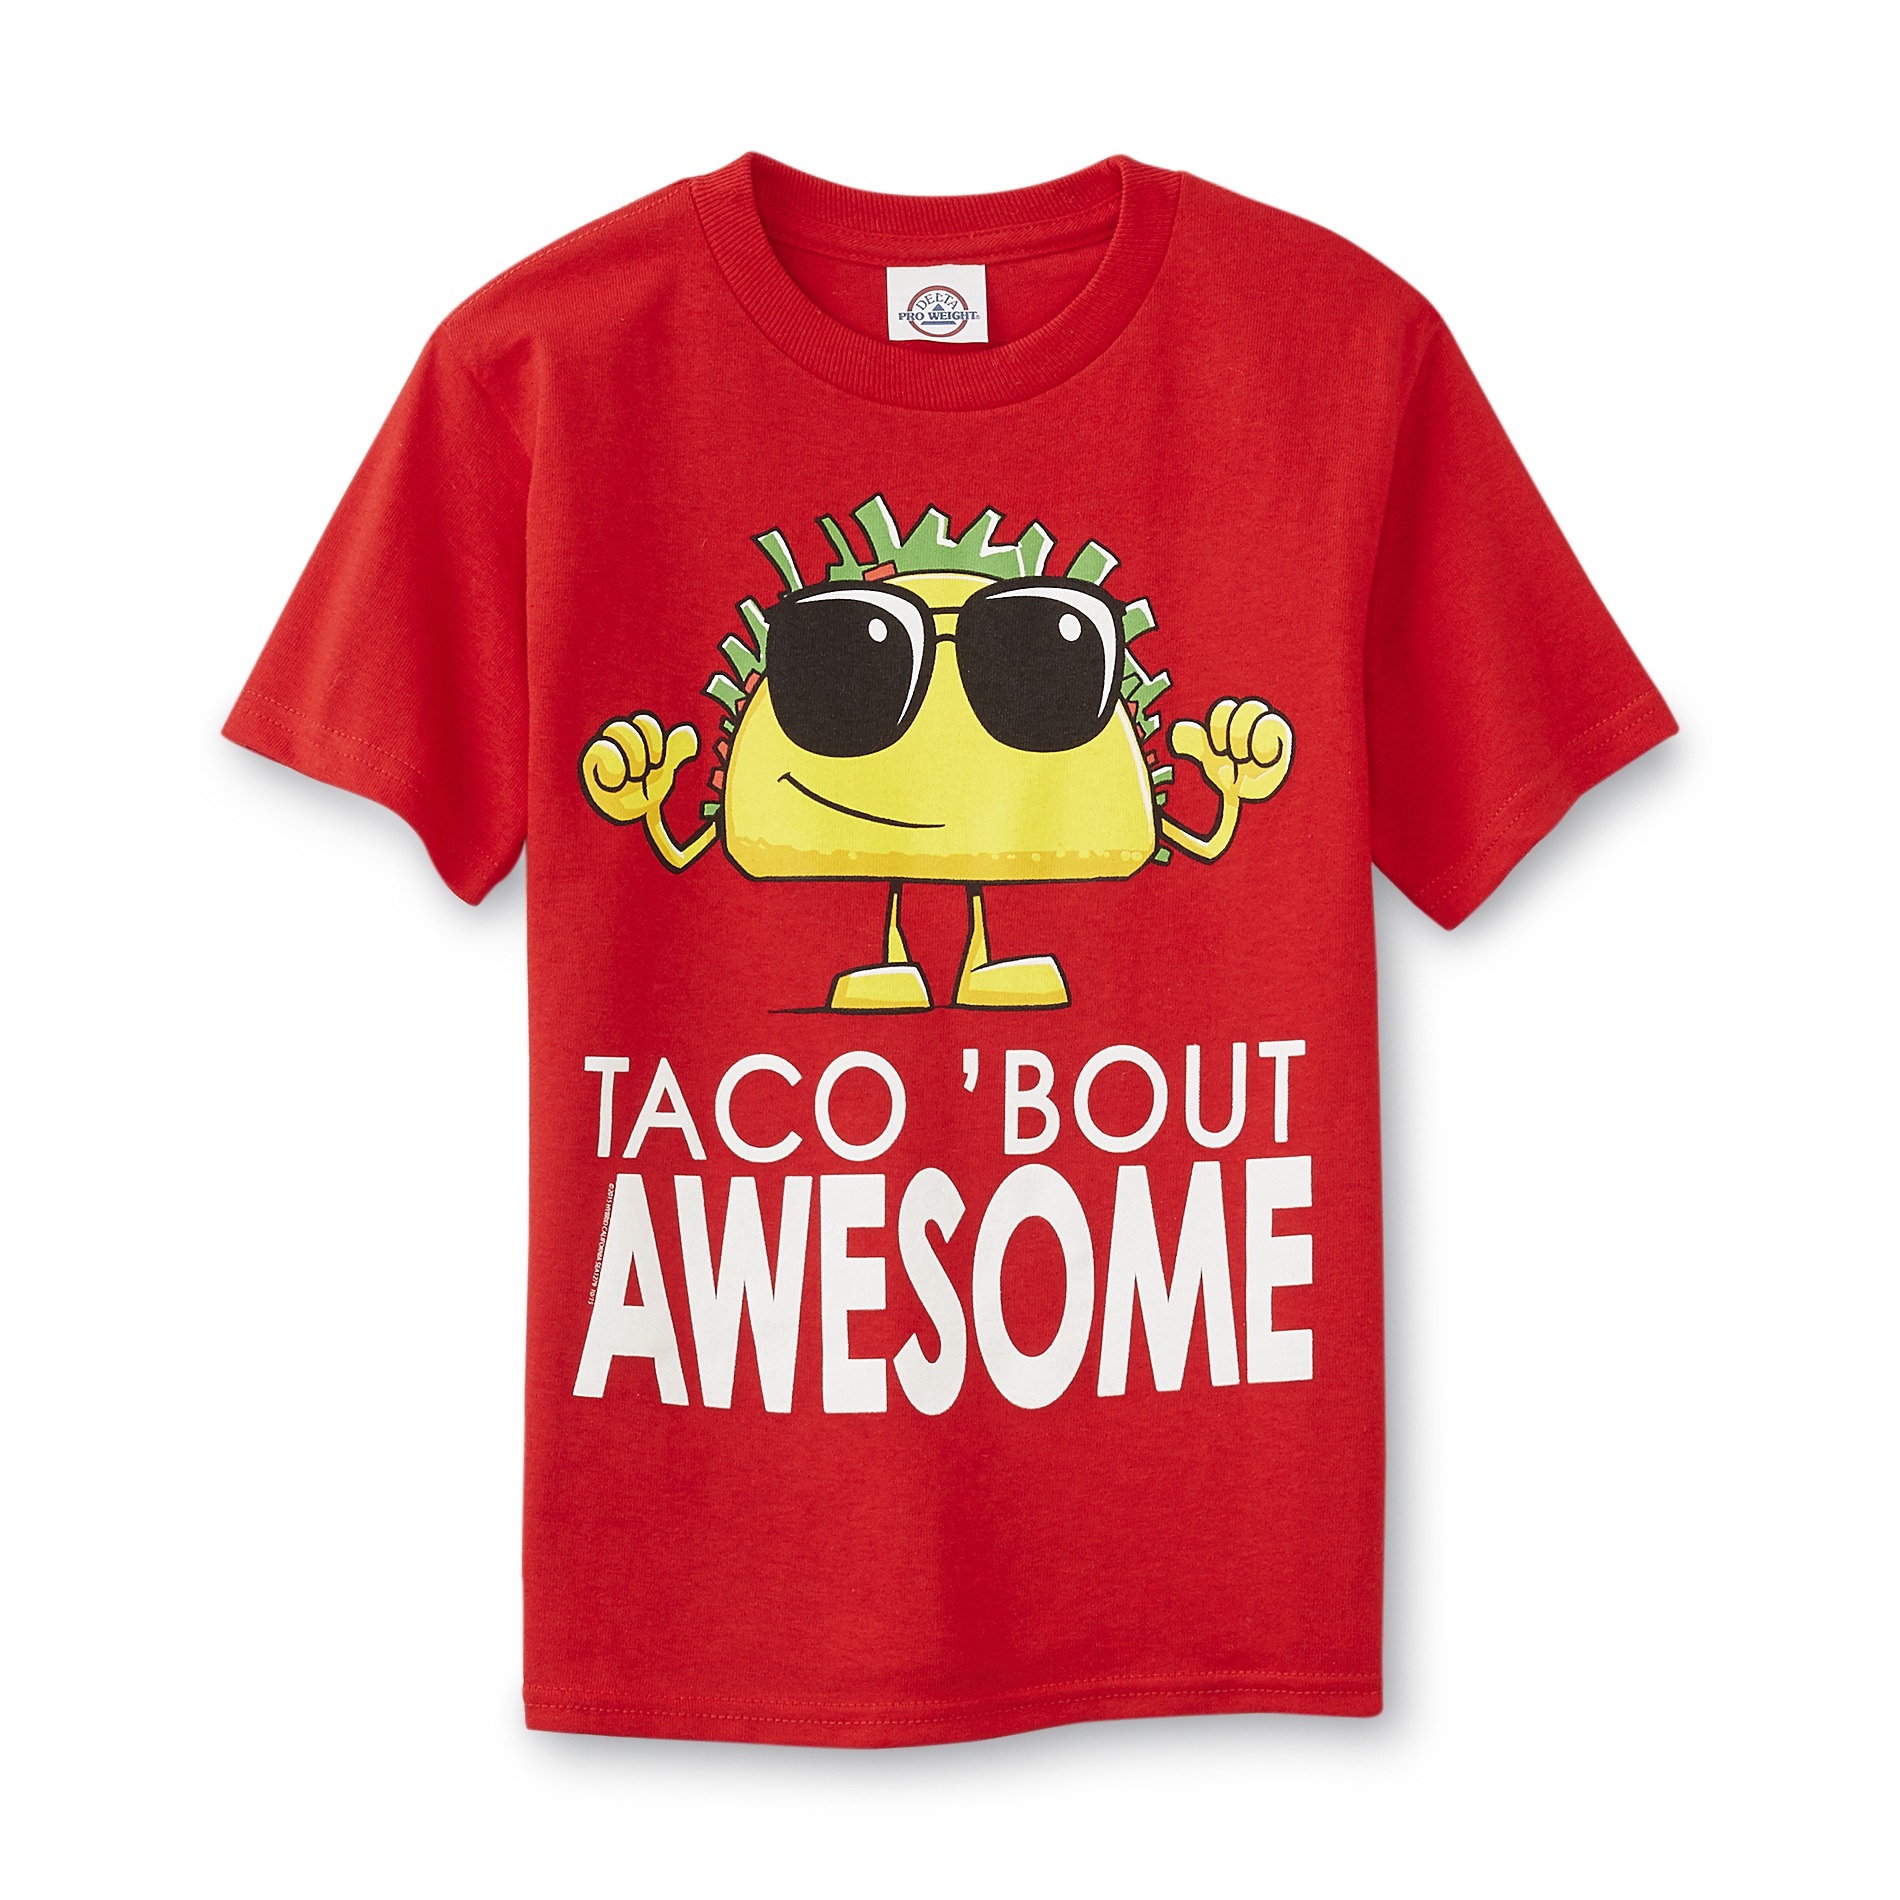 Boy's Graphic T-Shirt - Taco 'Bout Awesome